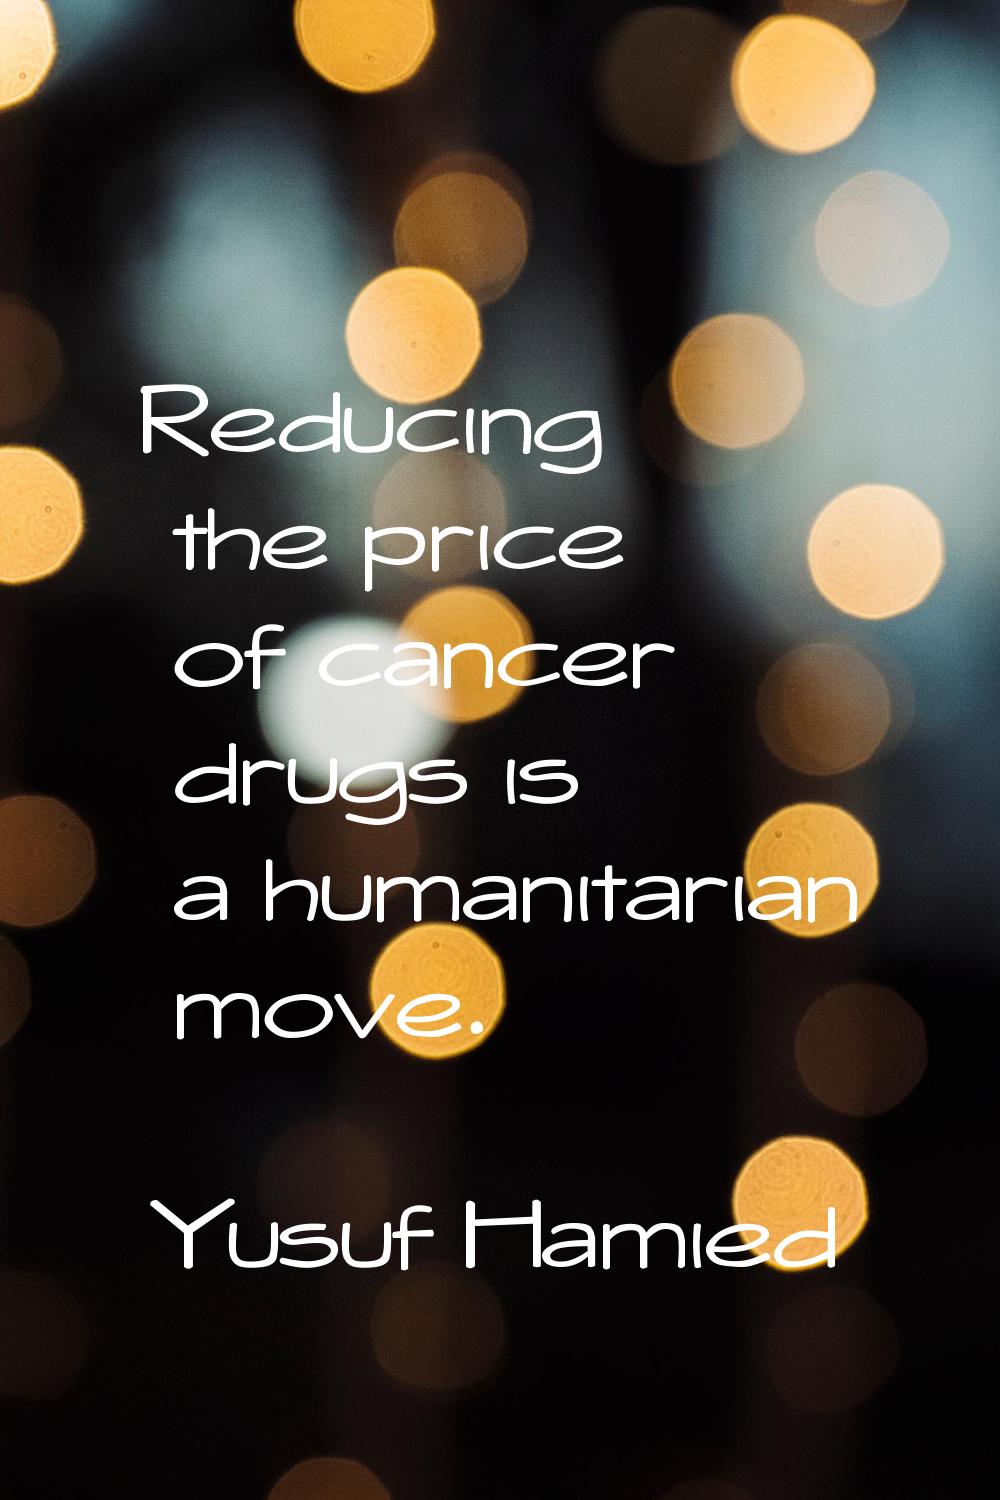 Reducing the price of cancer drugs is a humanitarian move.